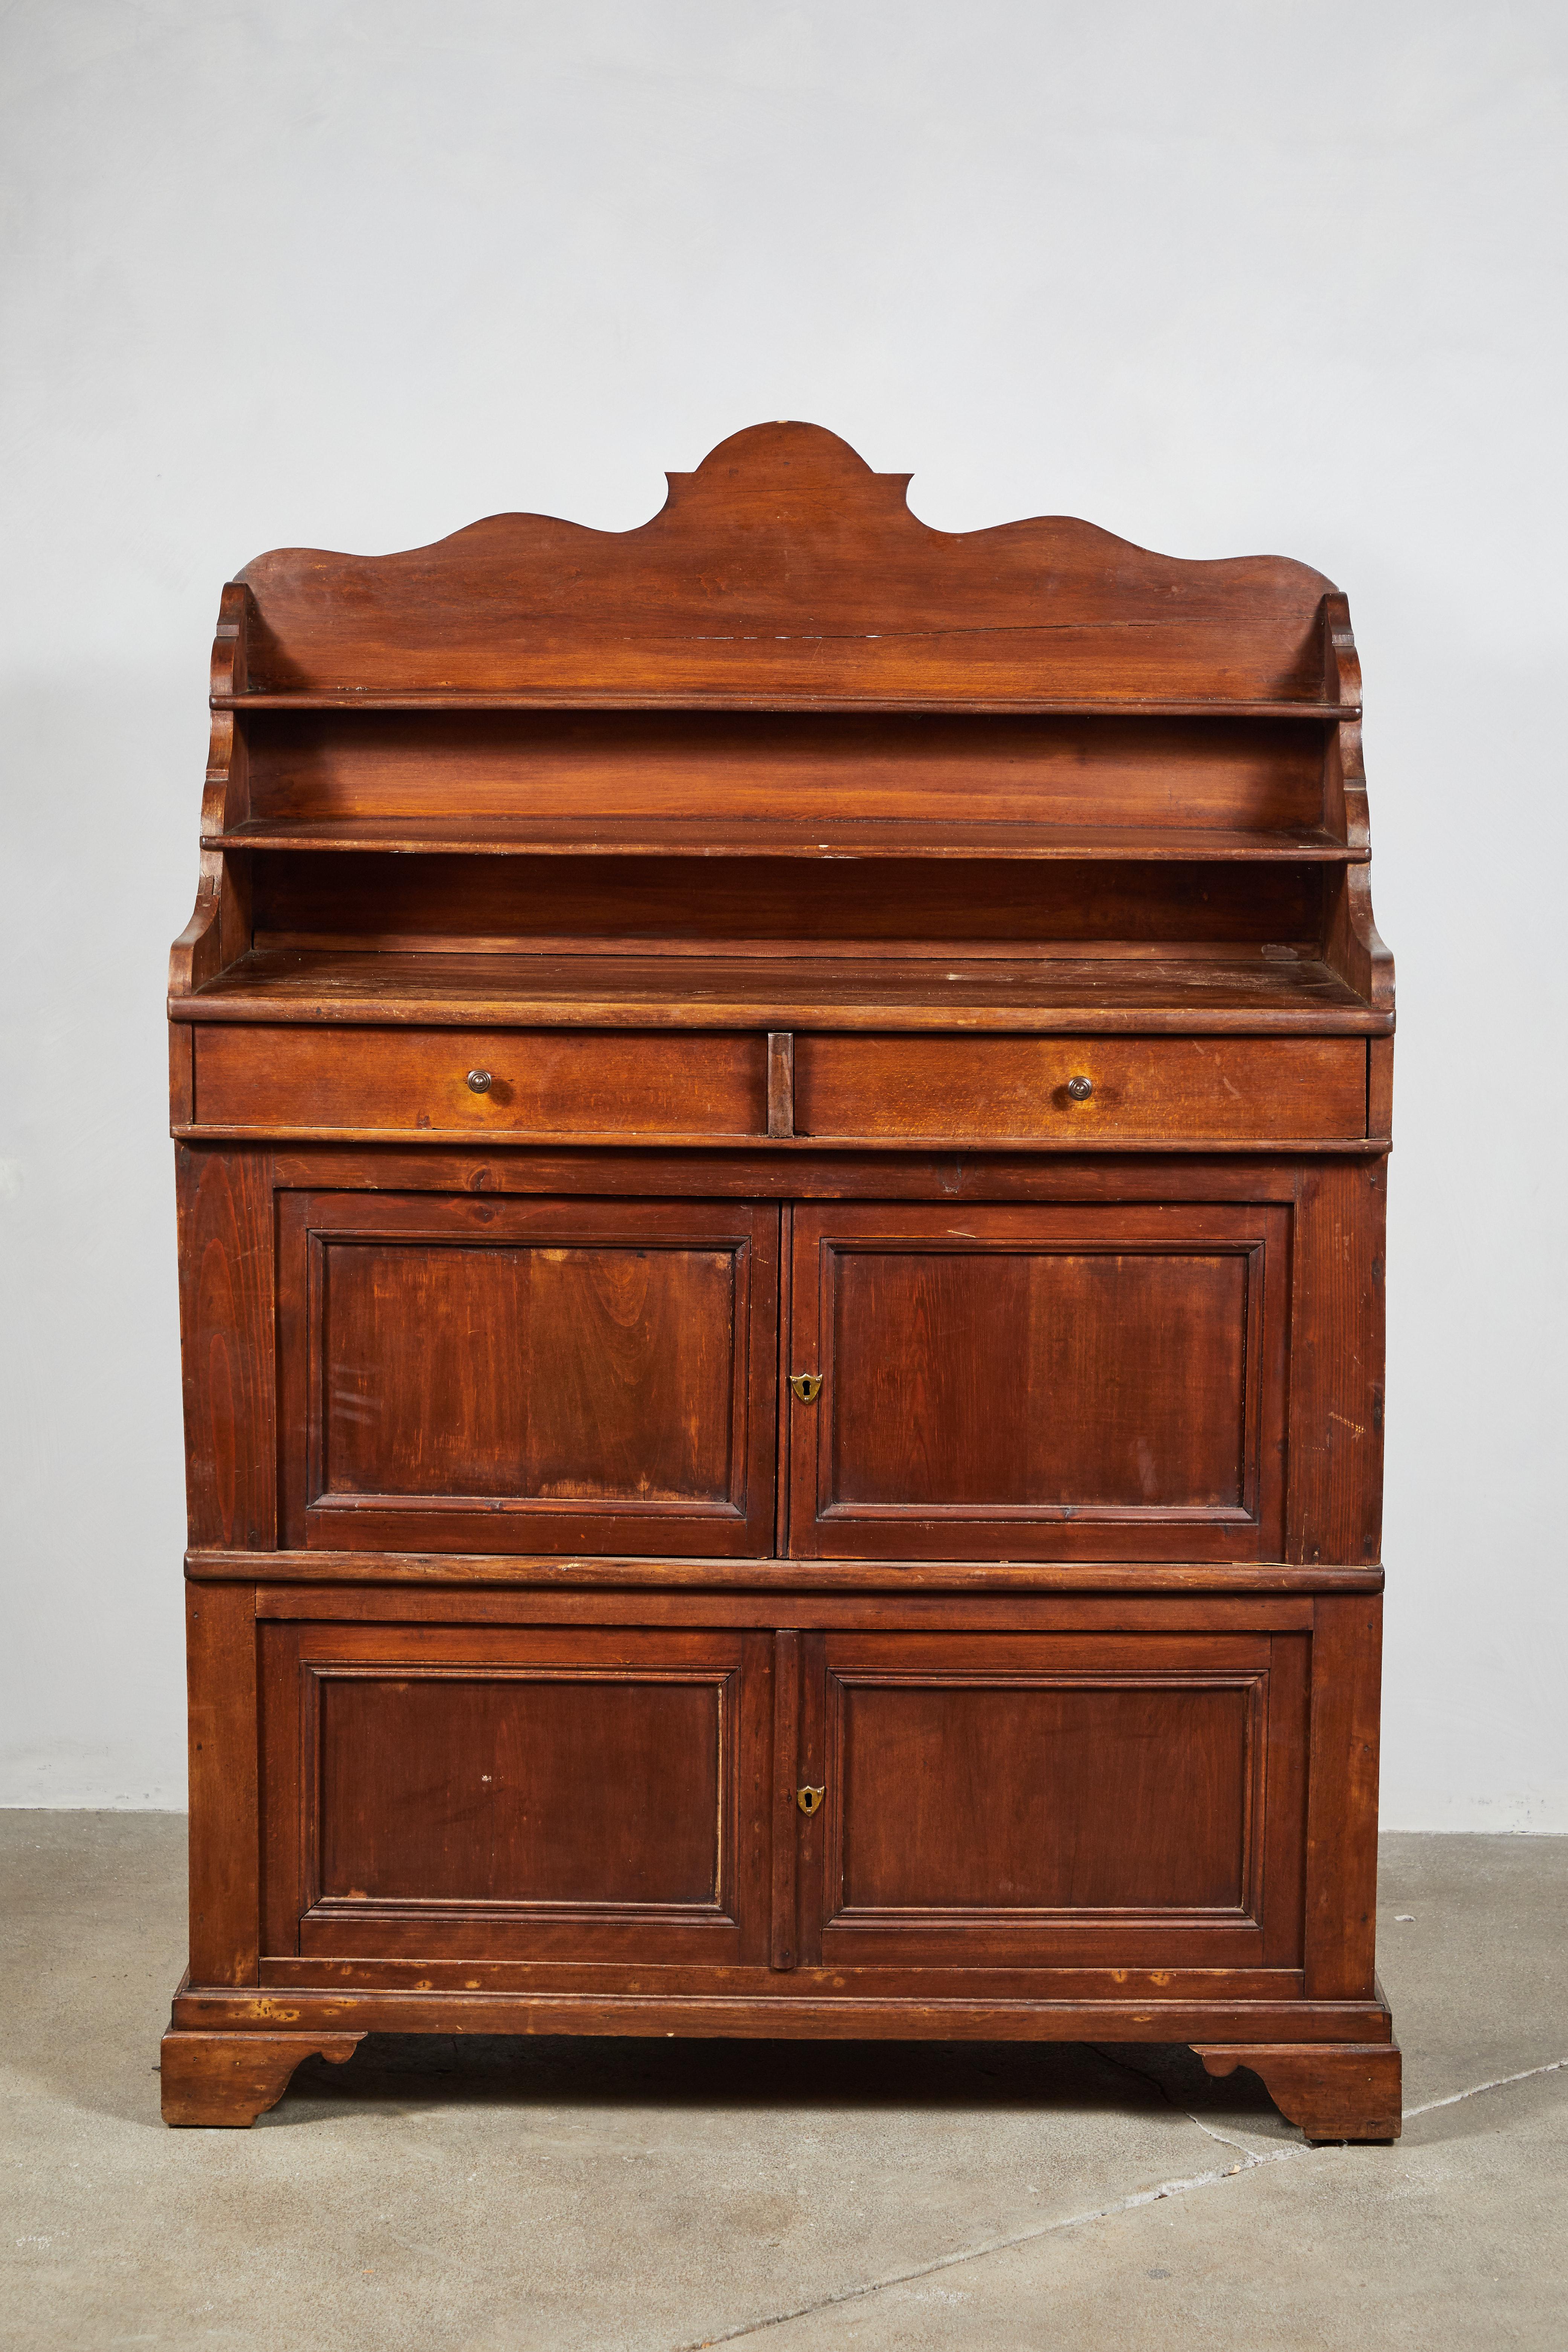 Early American carved walnut server with four doors and two drawers with exposed open shelves for display.